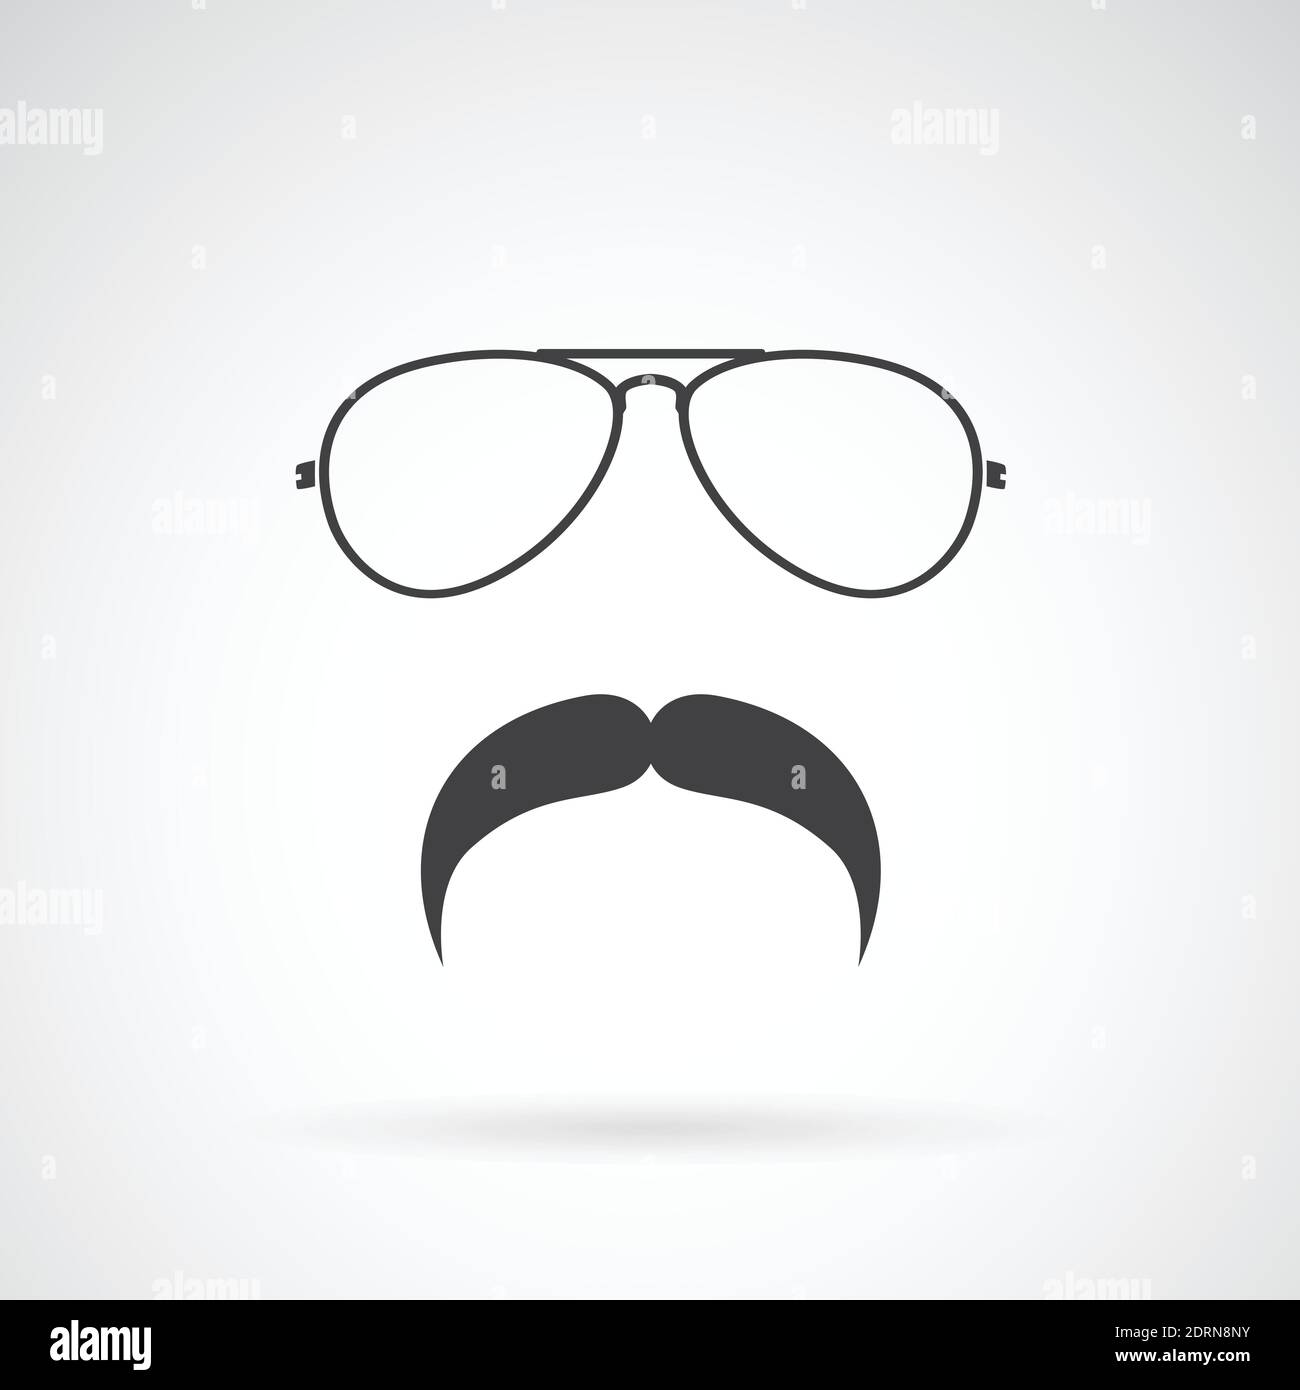 Vector image of an glasses and mustache on white background. Easy editable layered vector illustration. Stock Vector